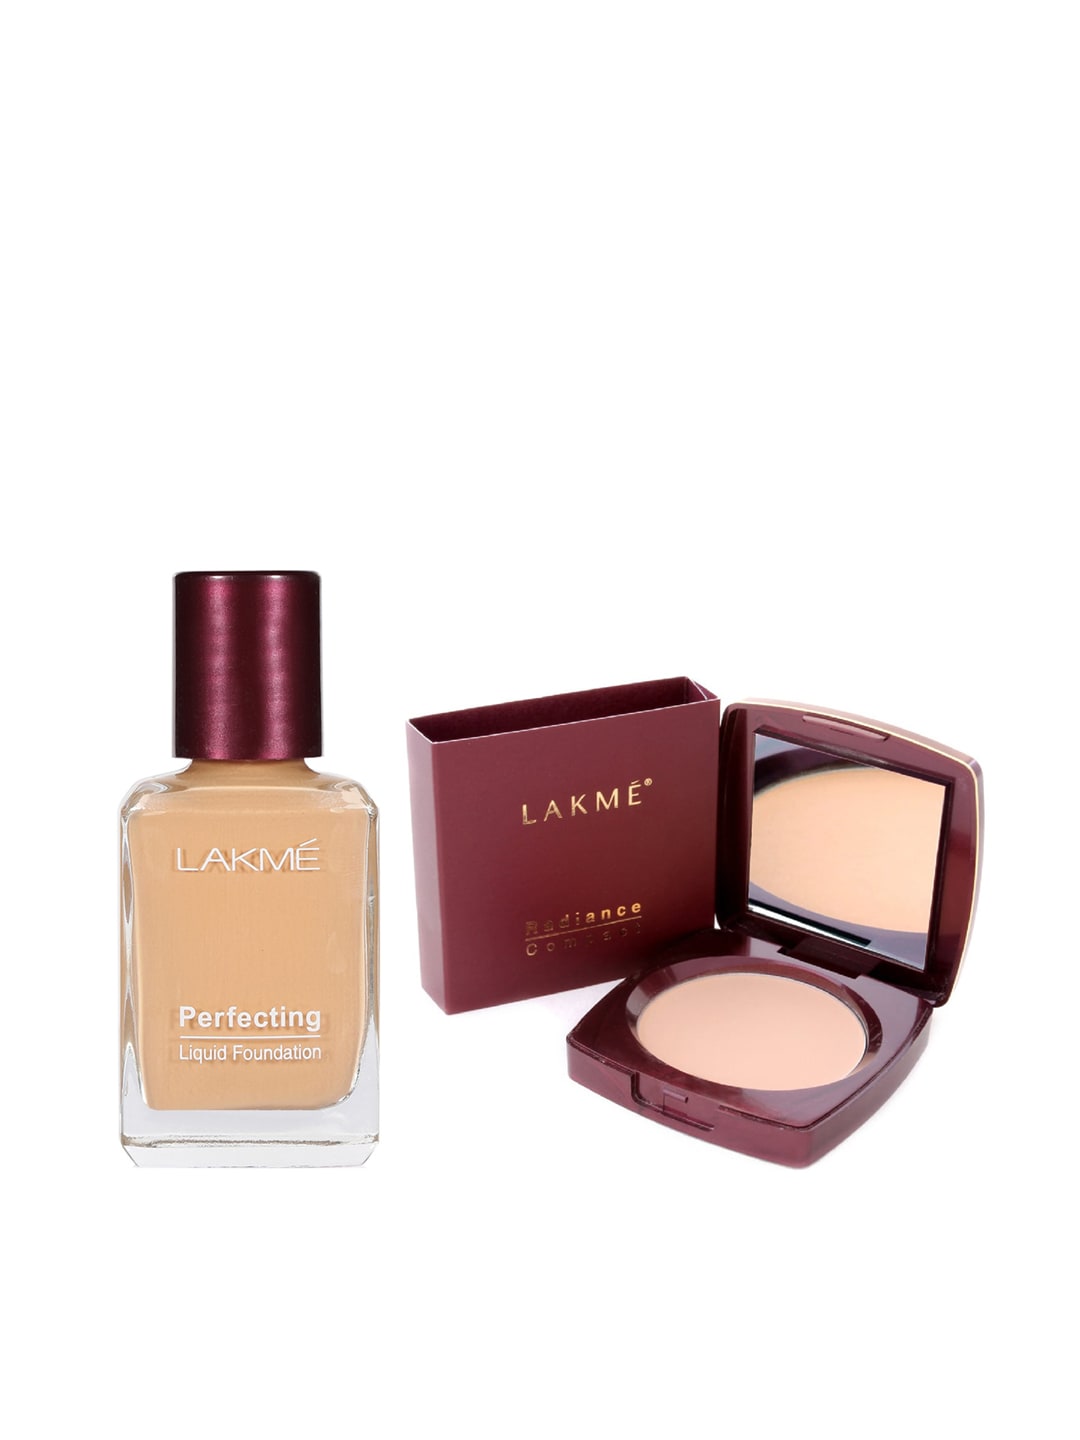 Lakme Set of Perfecting Liquid Foundation & Radiance Complexion Compact Price in India